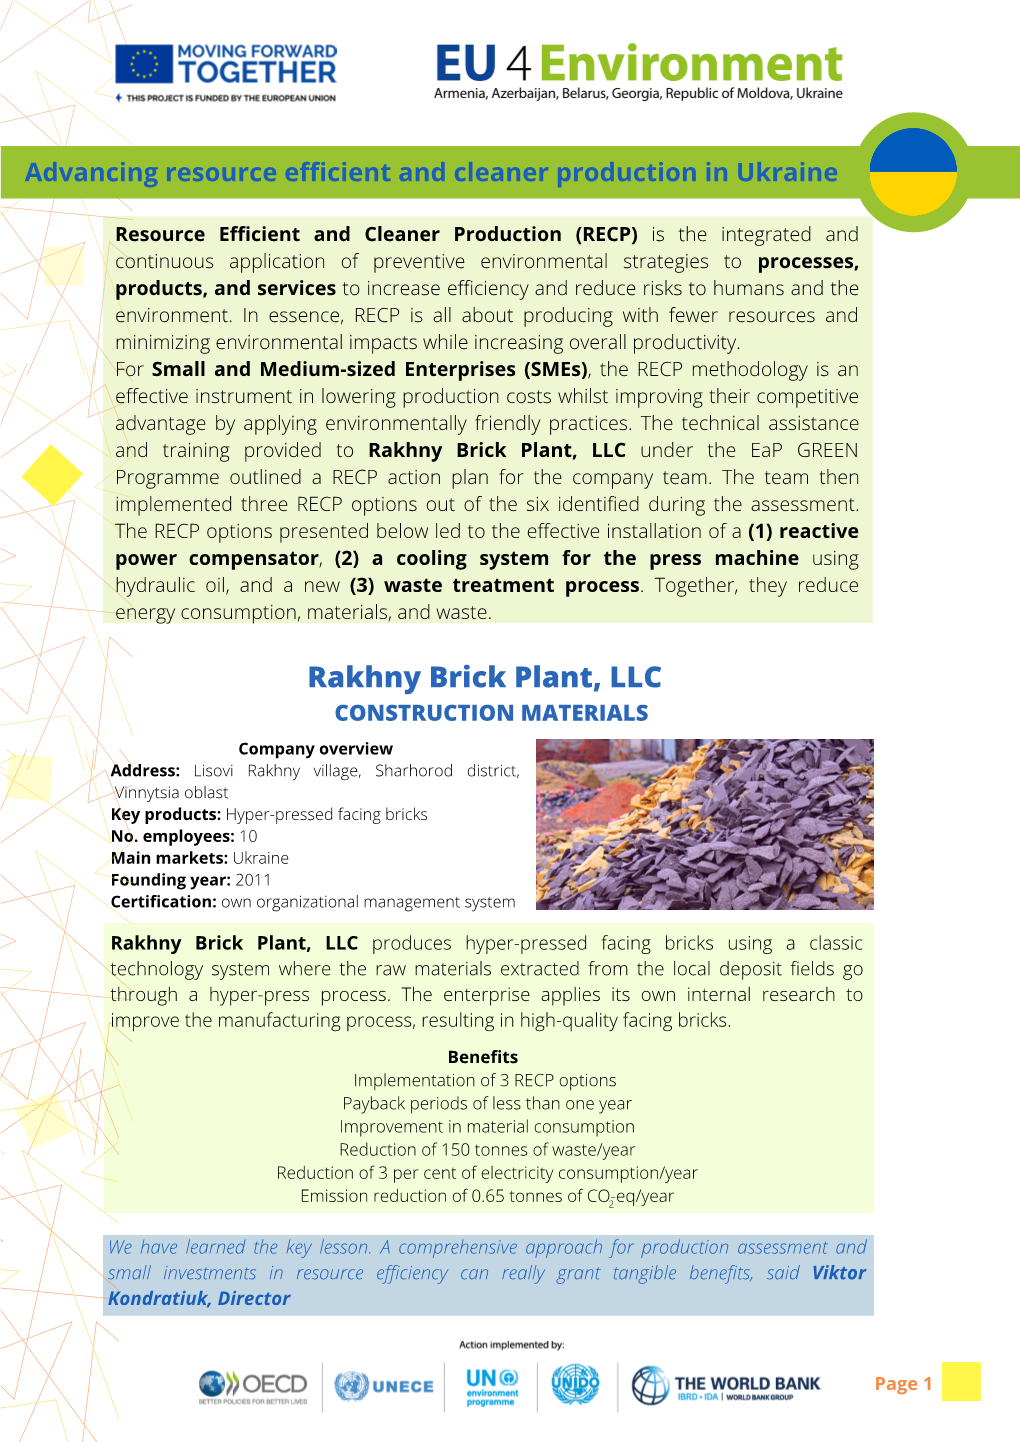 Rakhny Brick Plant, LLC Under the Eap GREEN Programme Outlined a RECP Action Plan for the Company Team